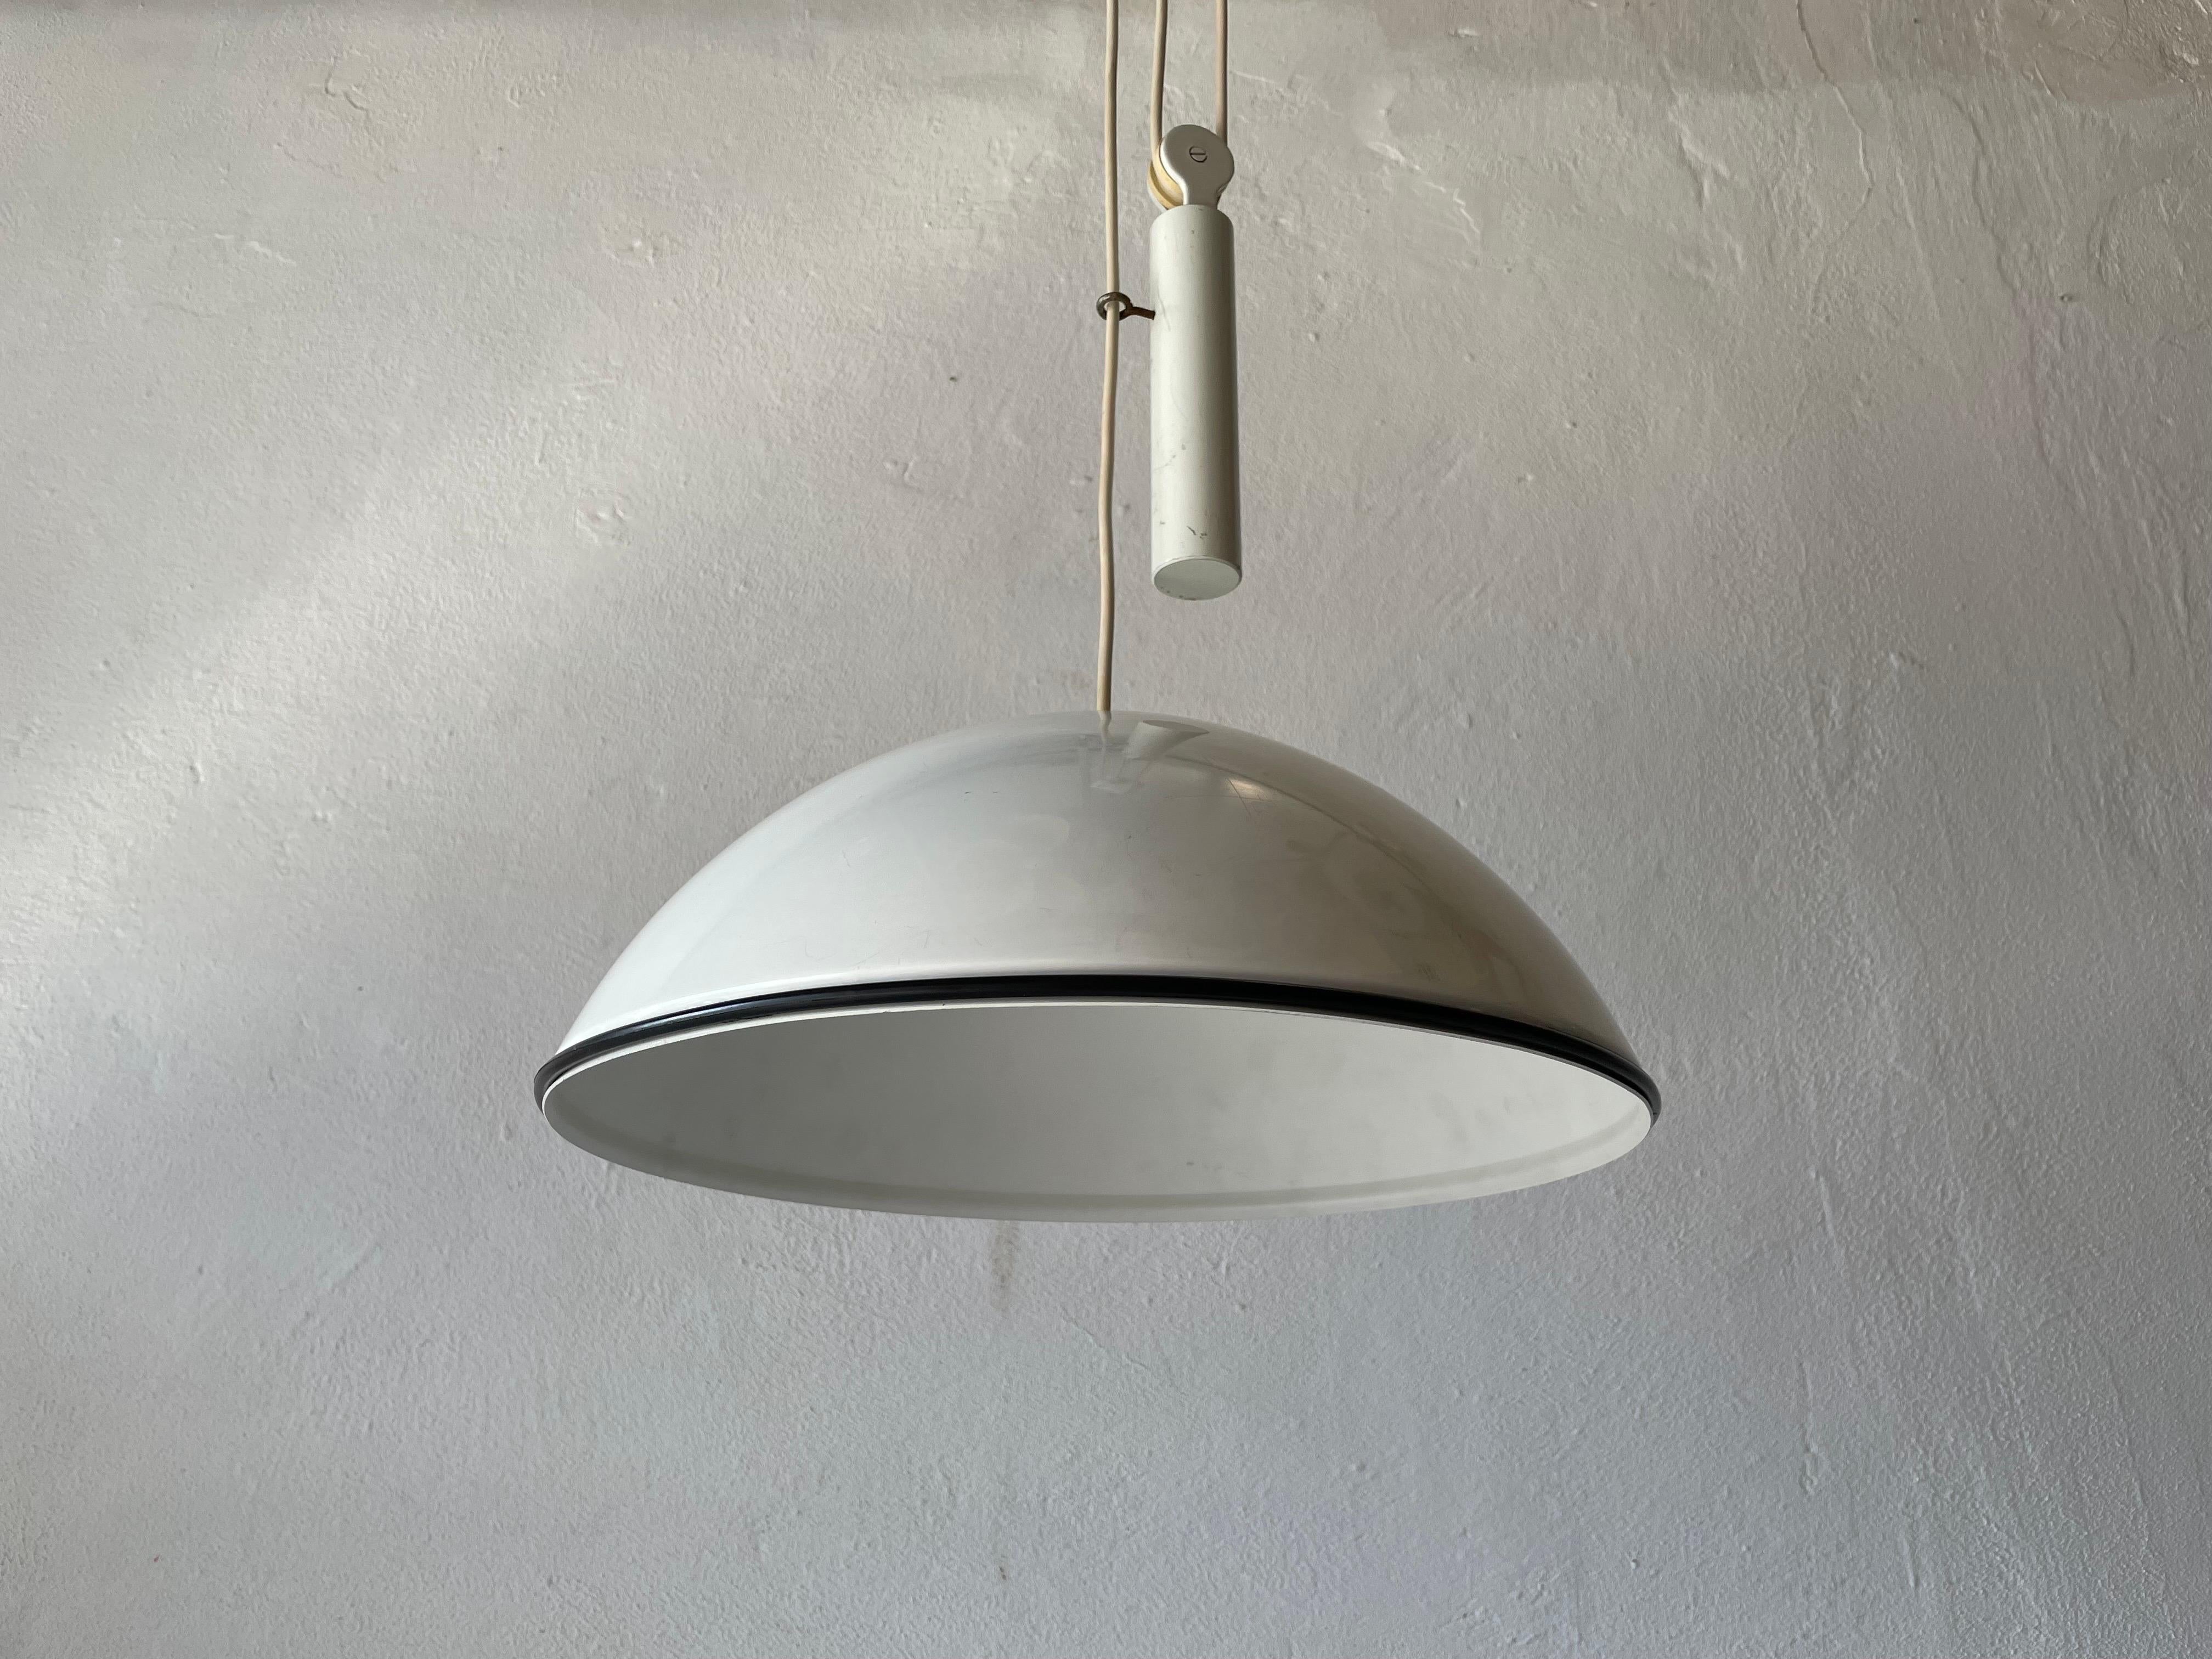 White metal counterweight pendant lamp by Flos, 1970s, Italy

Consistent with age and use.
Please see the pictures for the condition of the lamp.

This lamp works with E27 light bulb.

Measures: 
height: 106 cm
shade height and diameter: 16